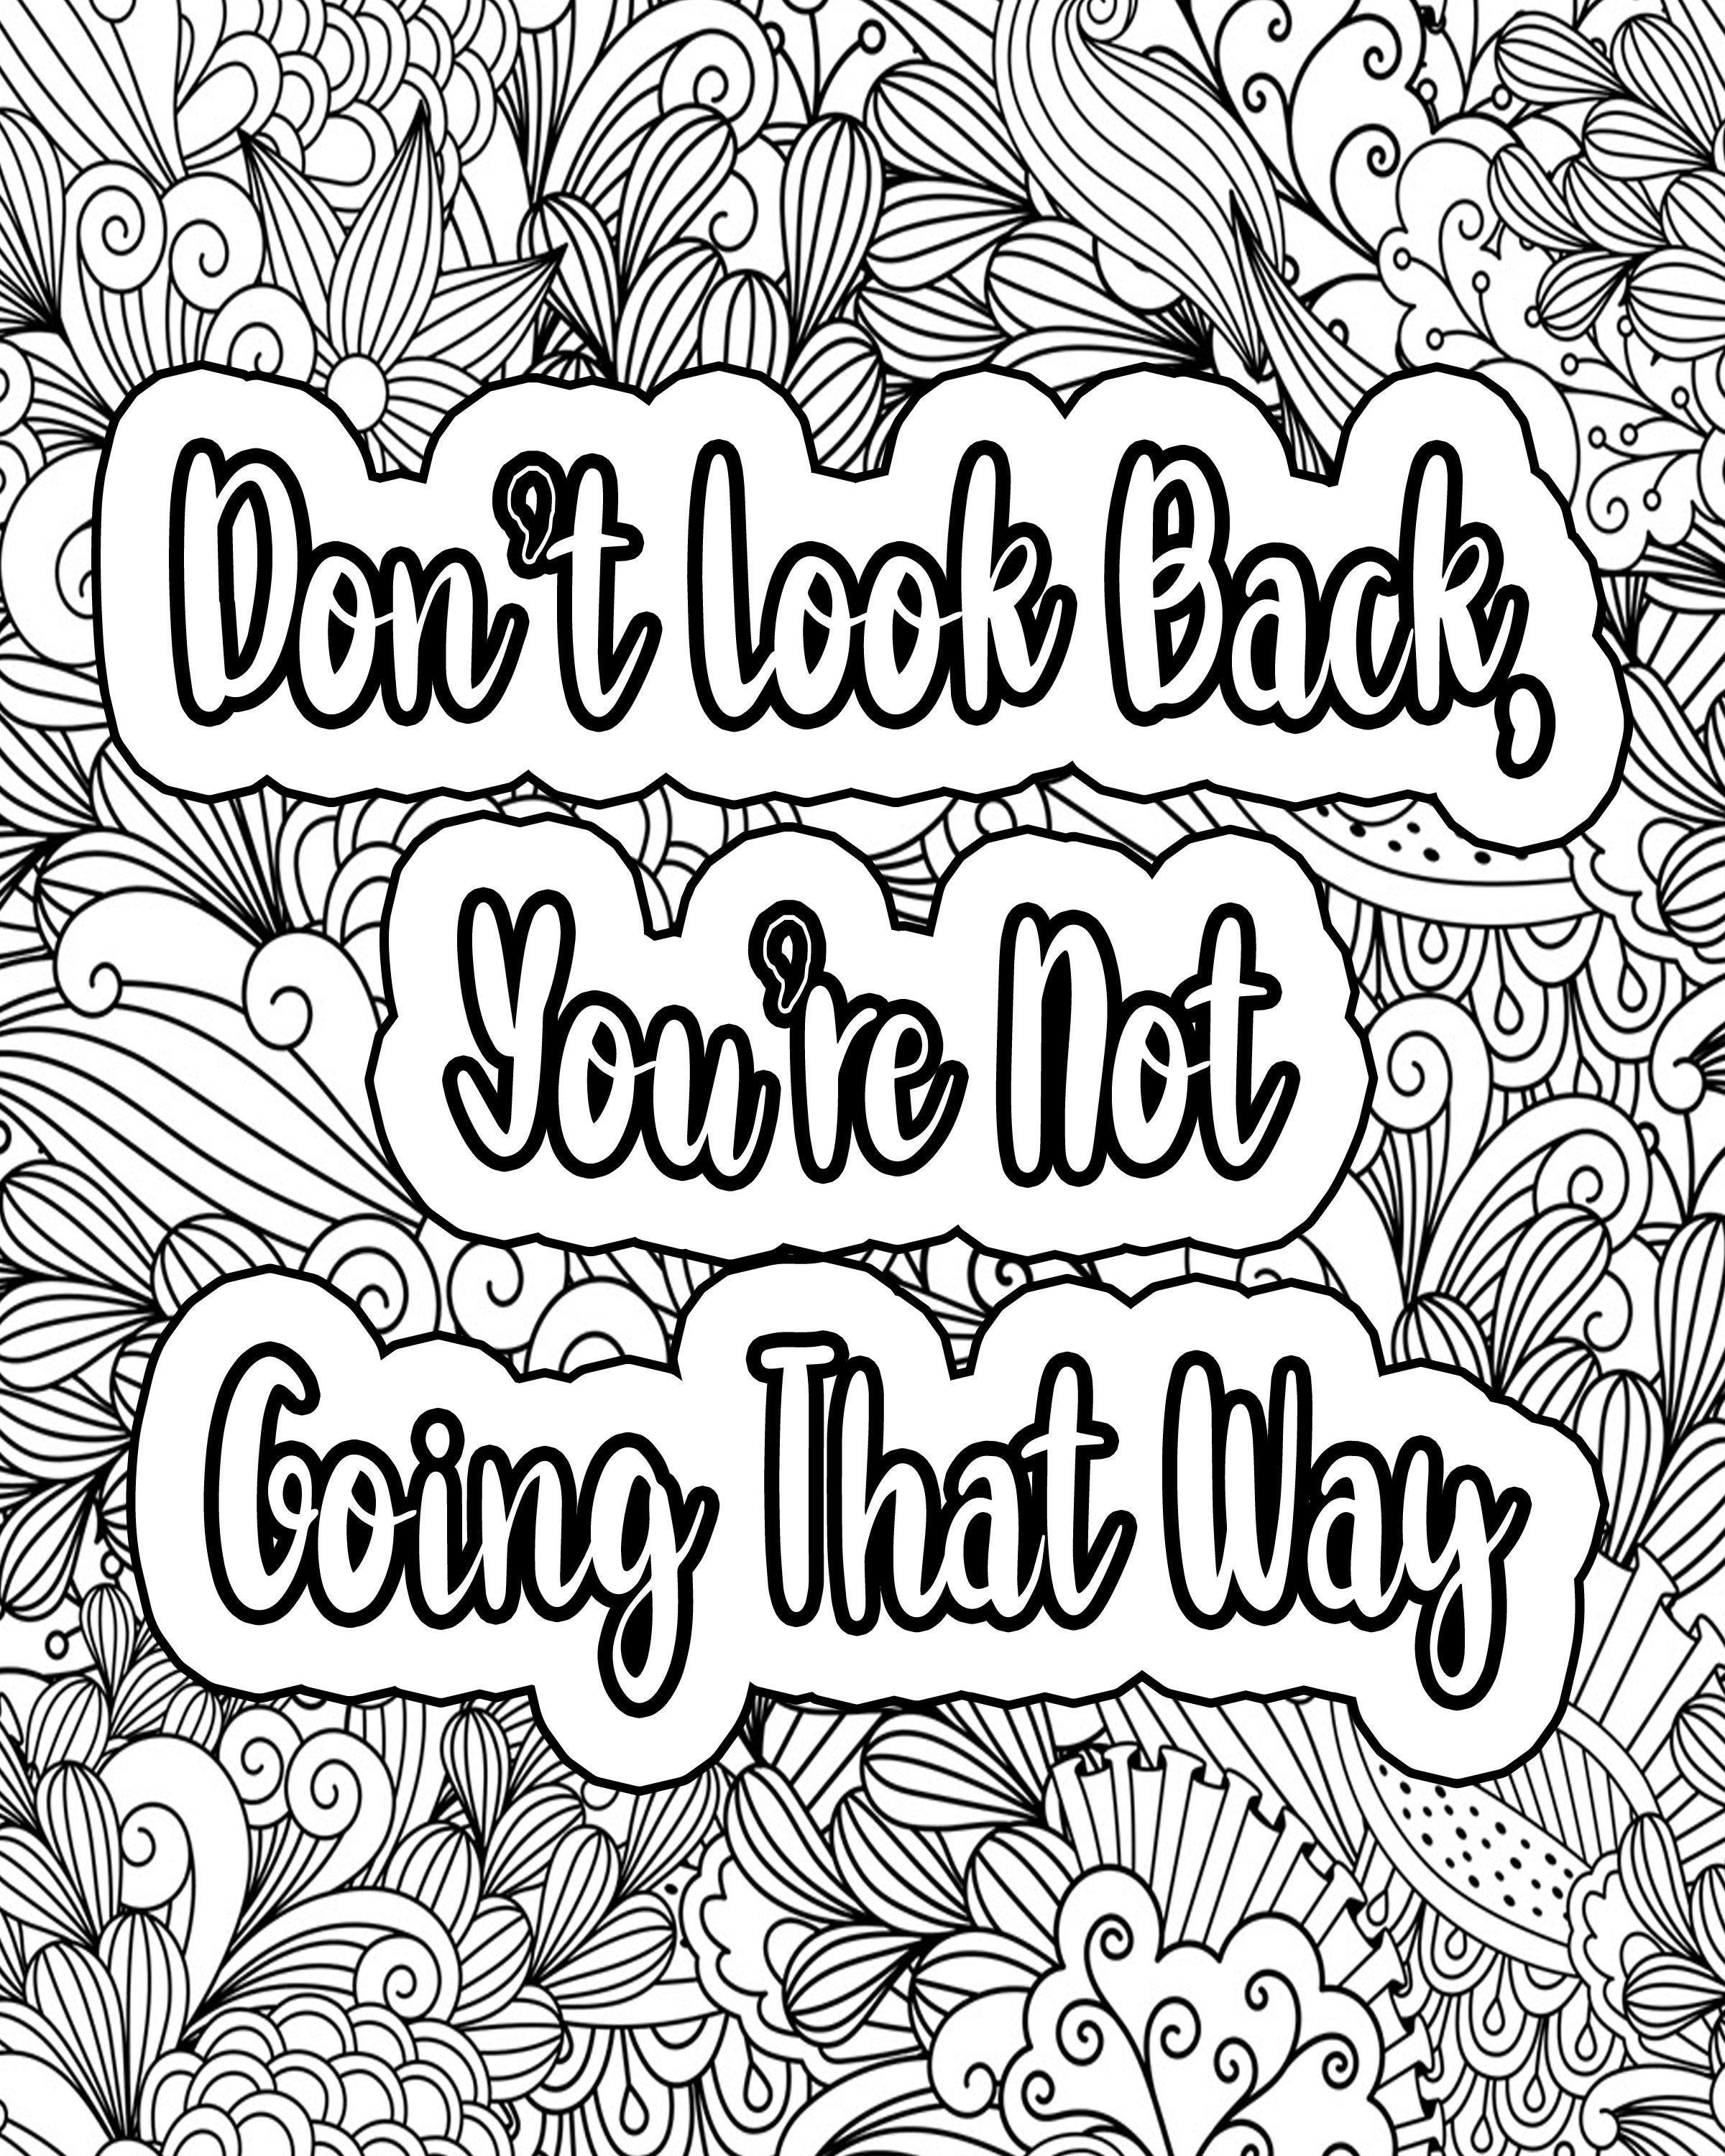 Inspirational Quotes Coloring Pages for Adults. Zentangle - Etsy